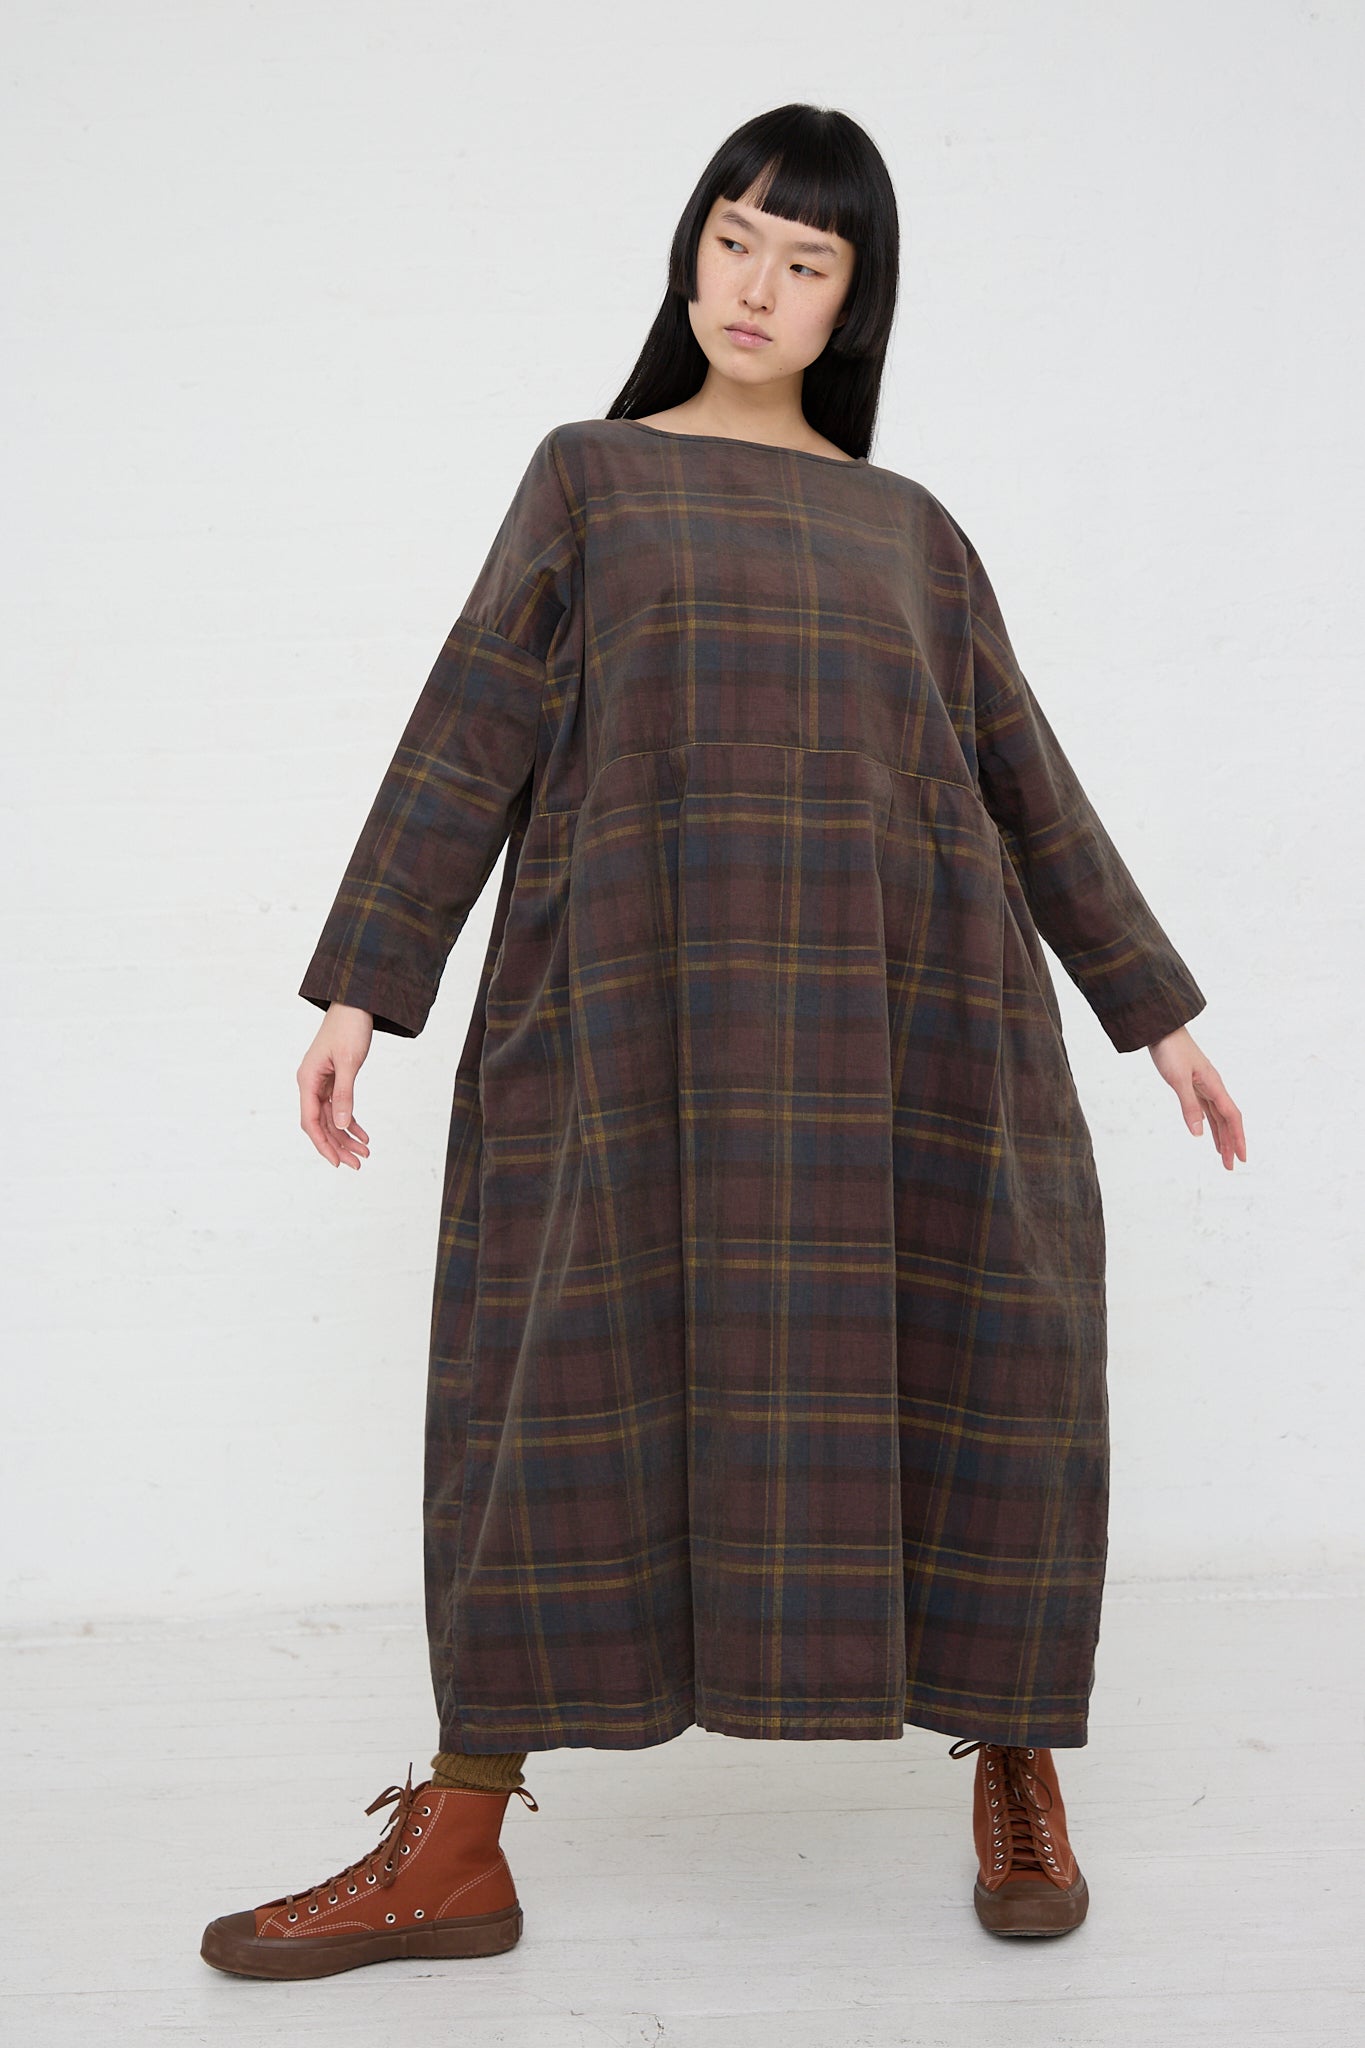 A woman wearing a relaxed fit Ichi brown plaid dress made of woven cotton fabric.